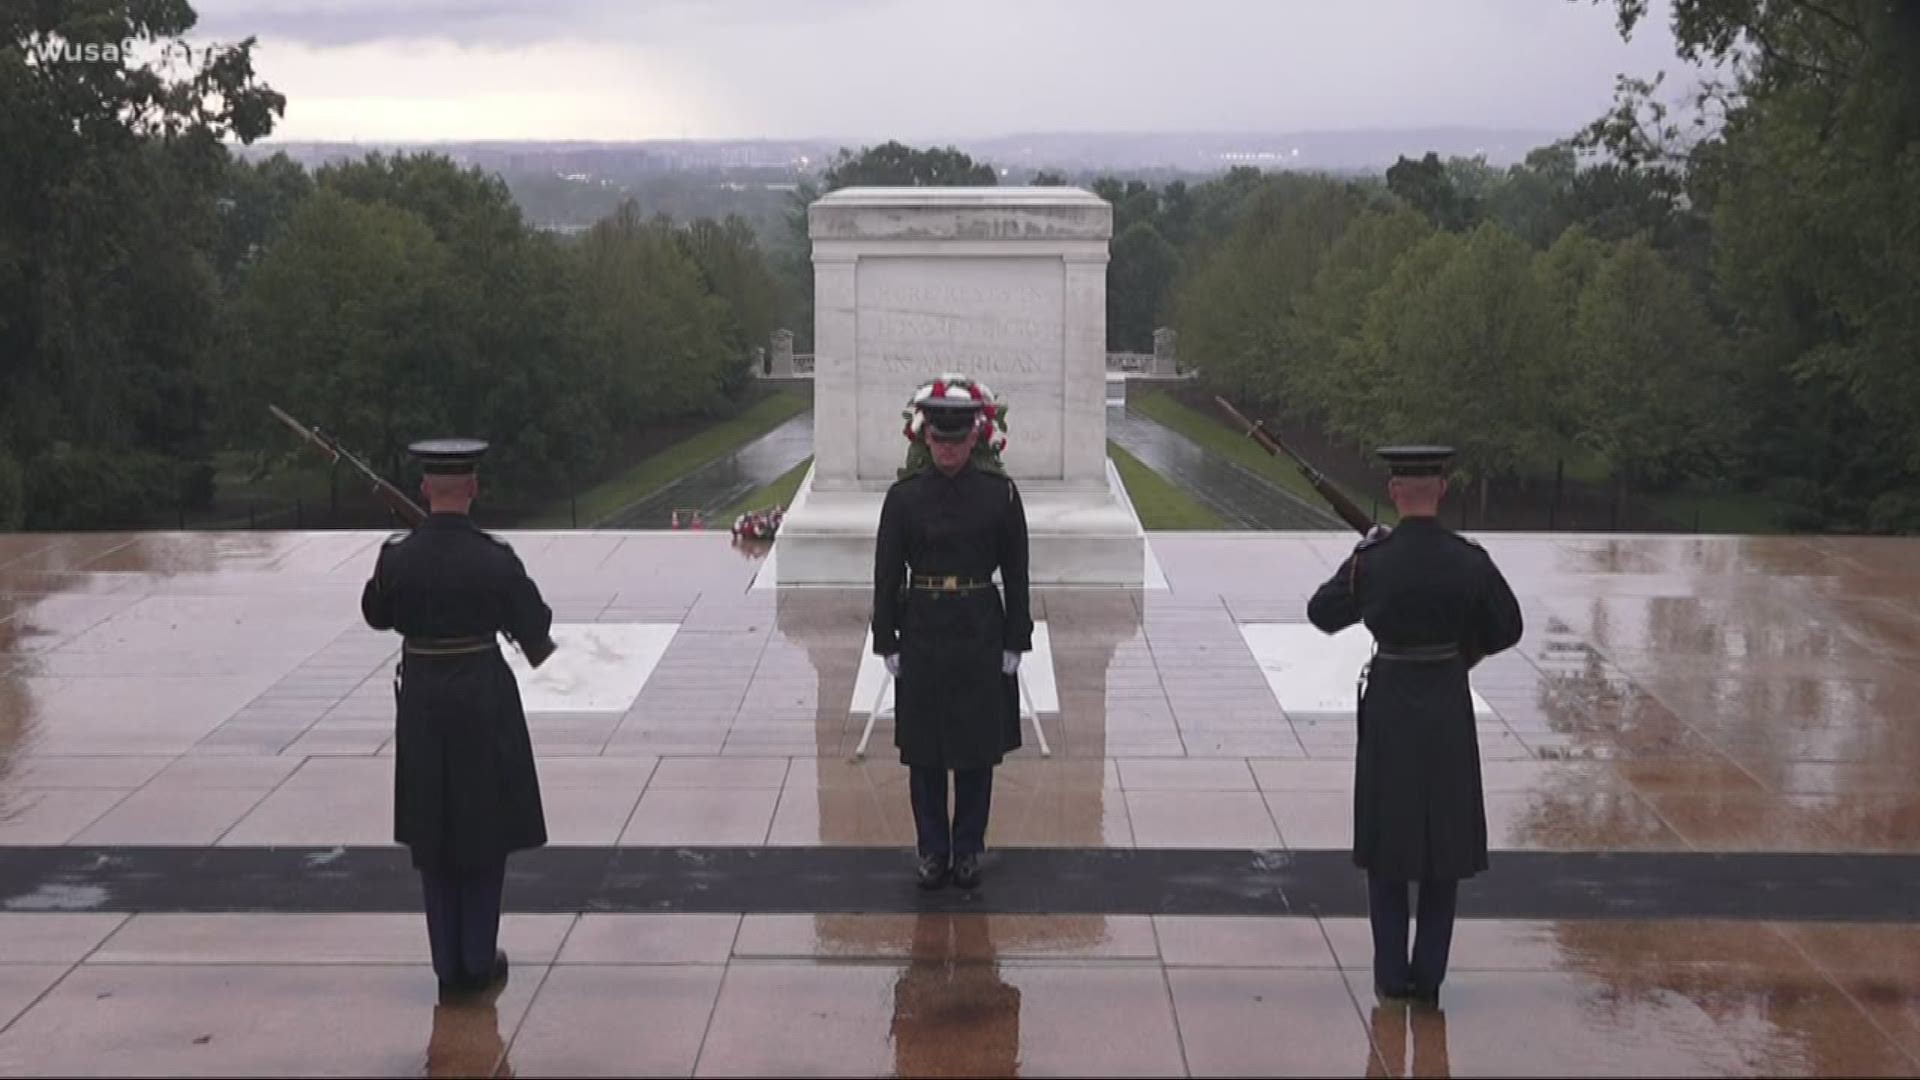 Even as a deluge hit the District, sentinels from the nation’s Old Guard continued their watch over the tomb, 24 hours a day.